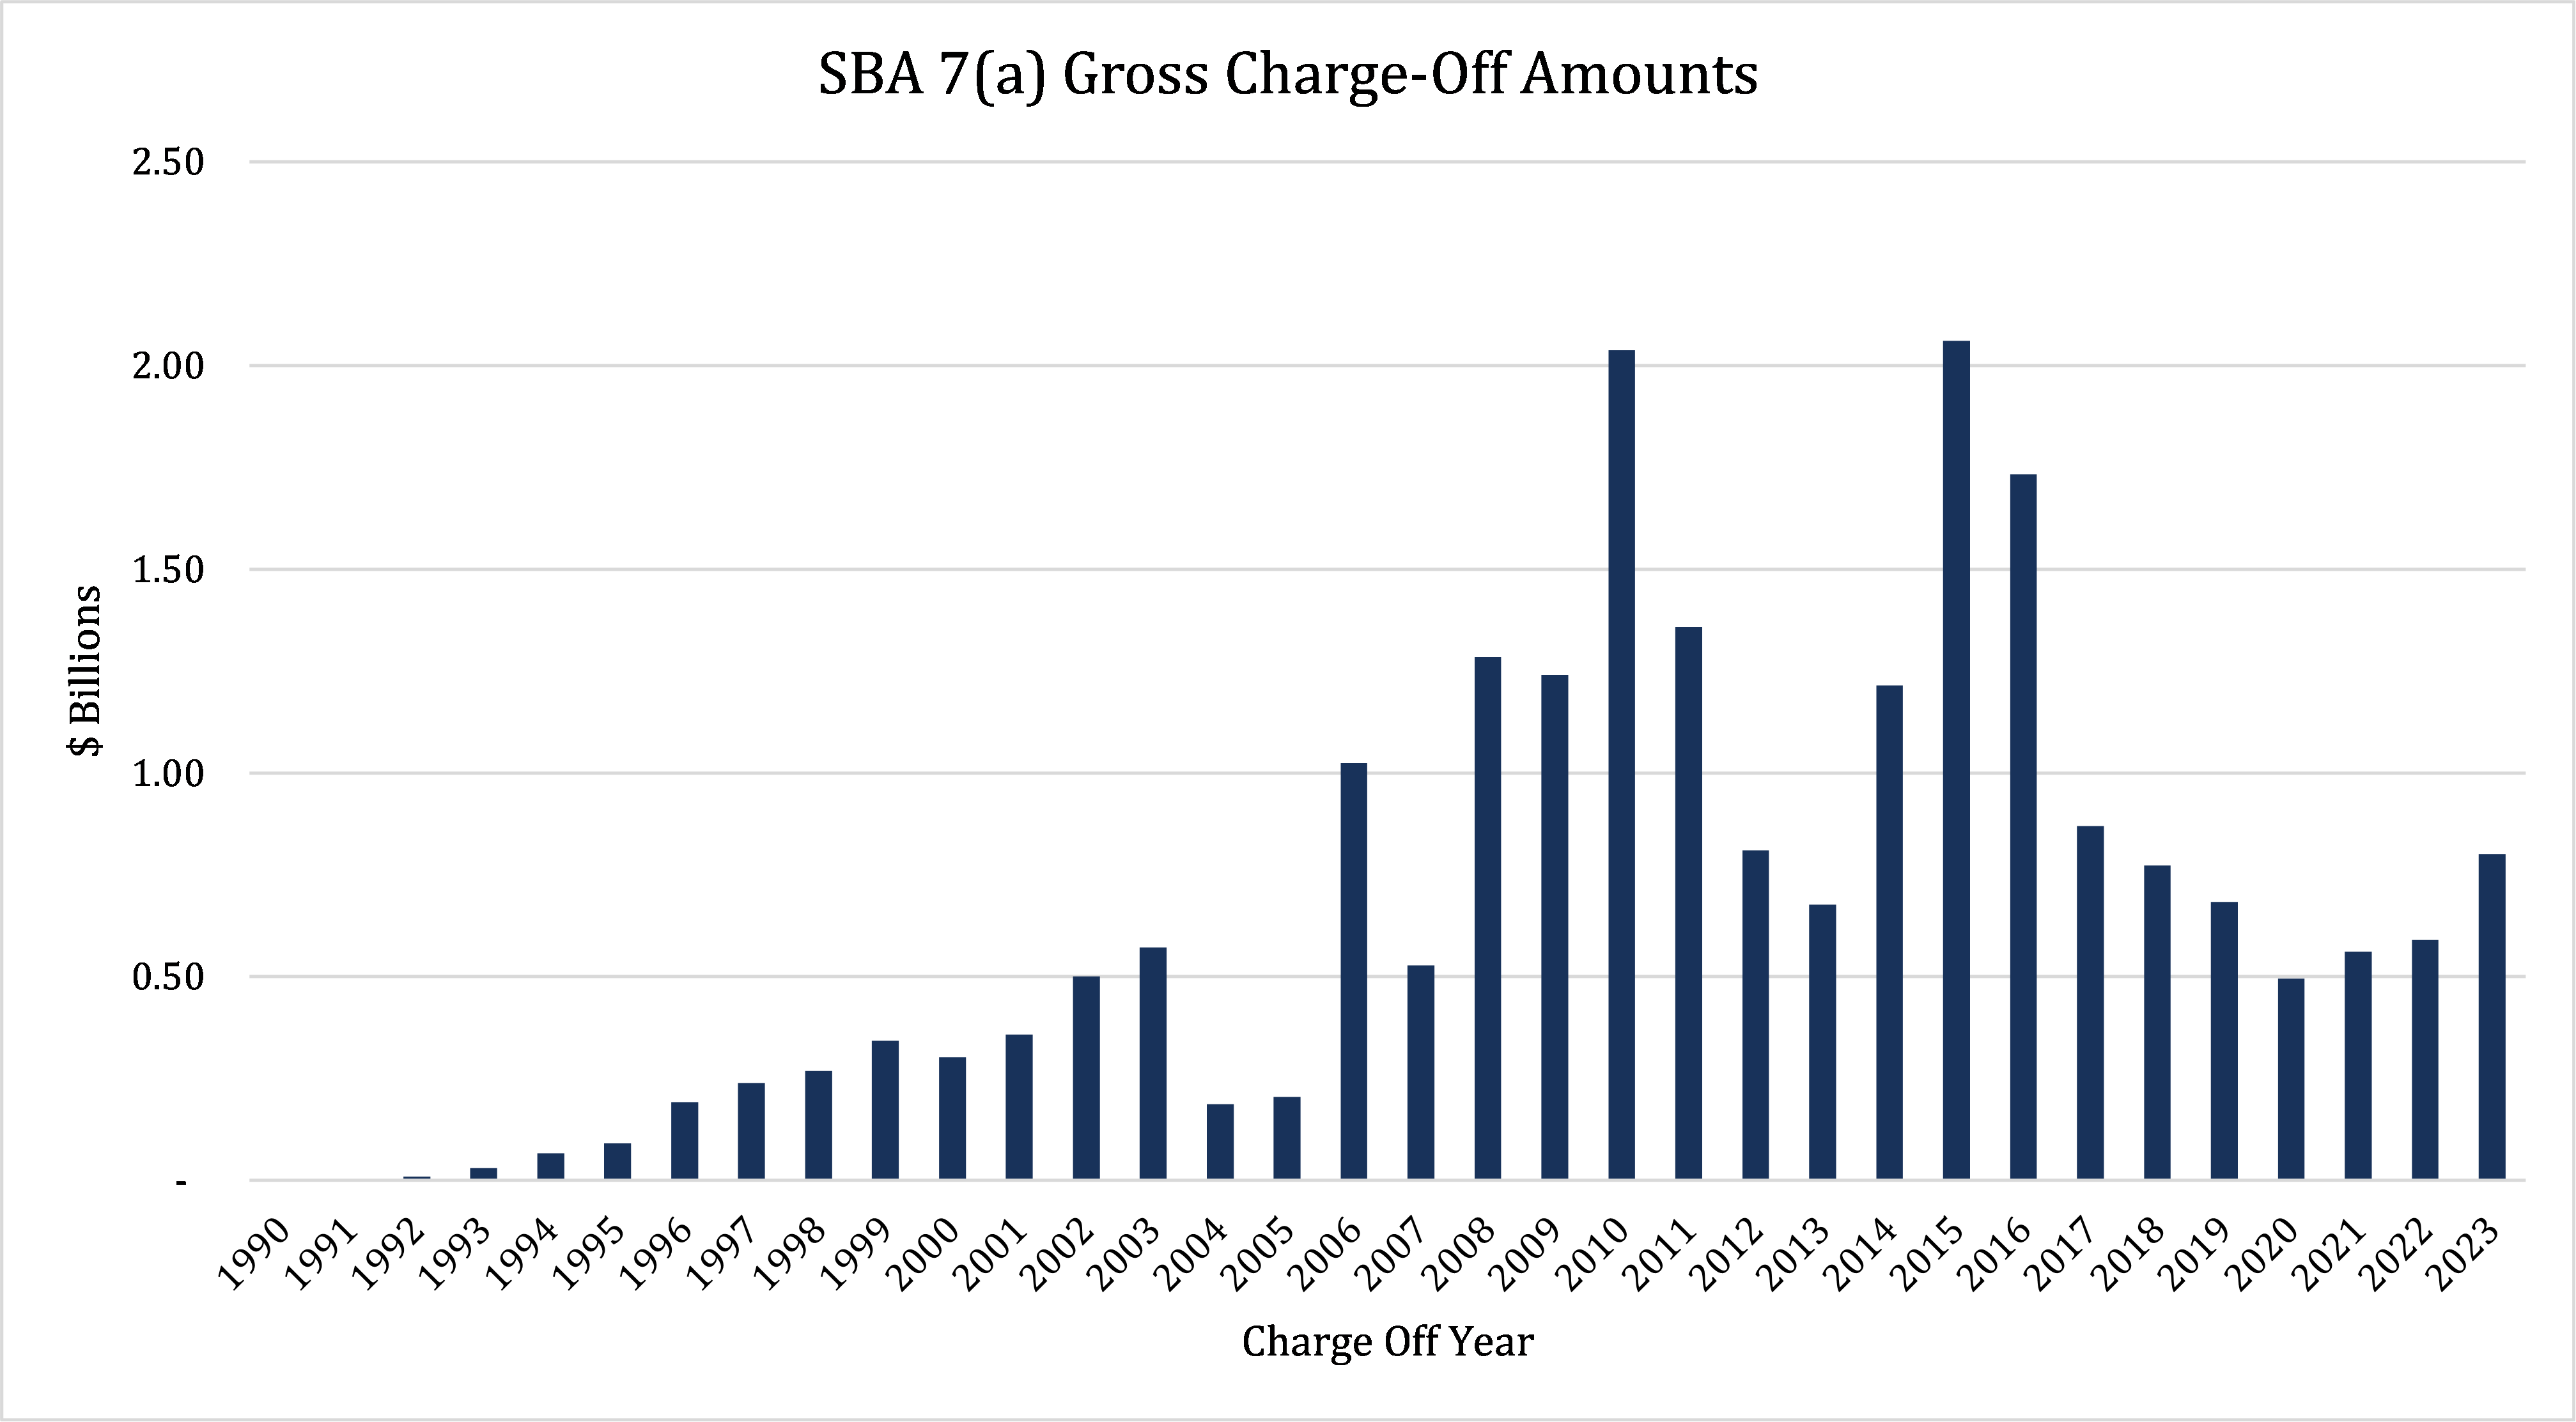 SBA 7a gross charge-off amounts graph